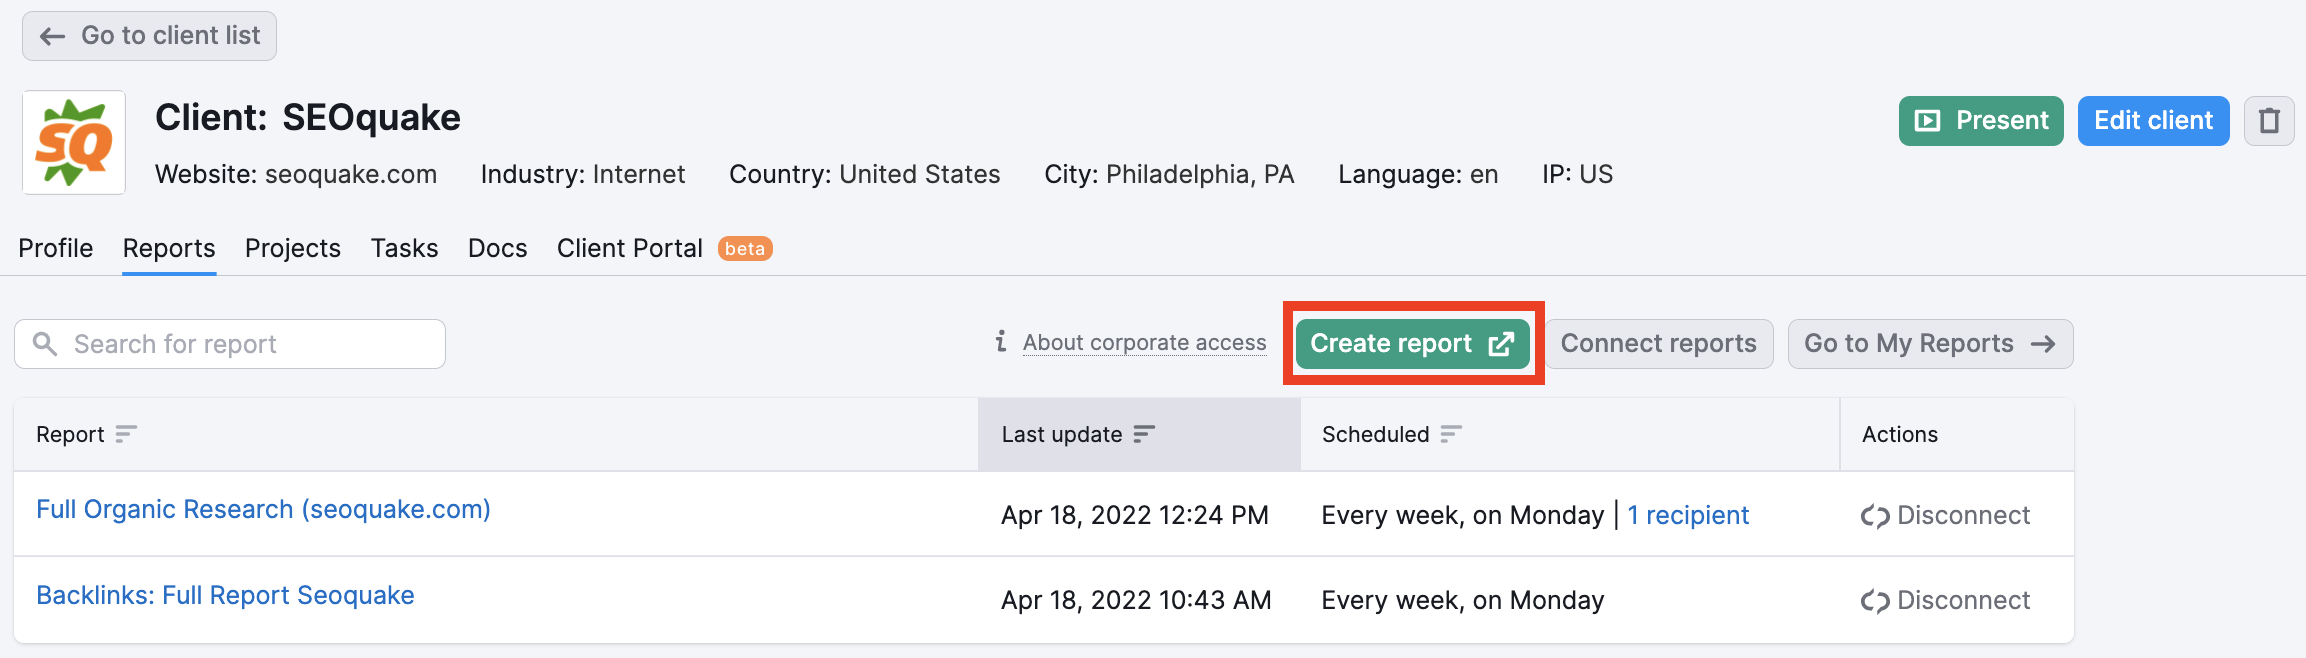 CRM creating reports